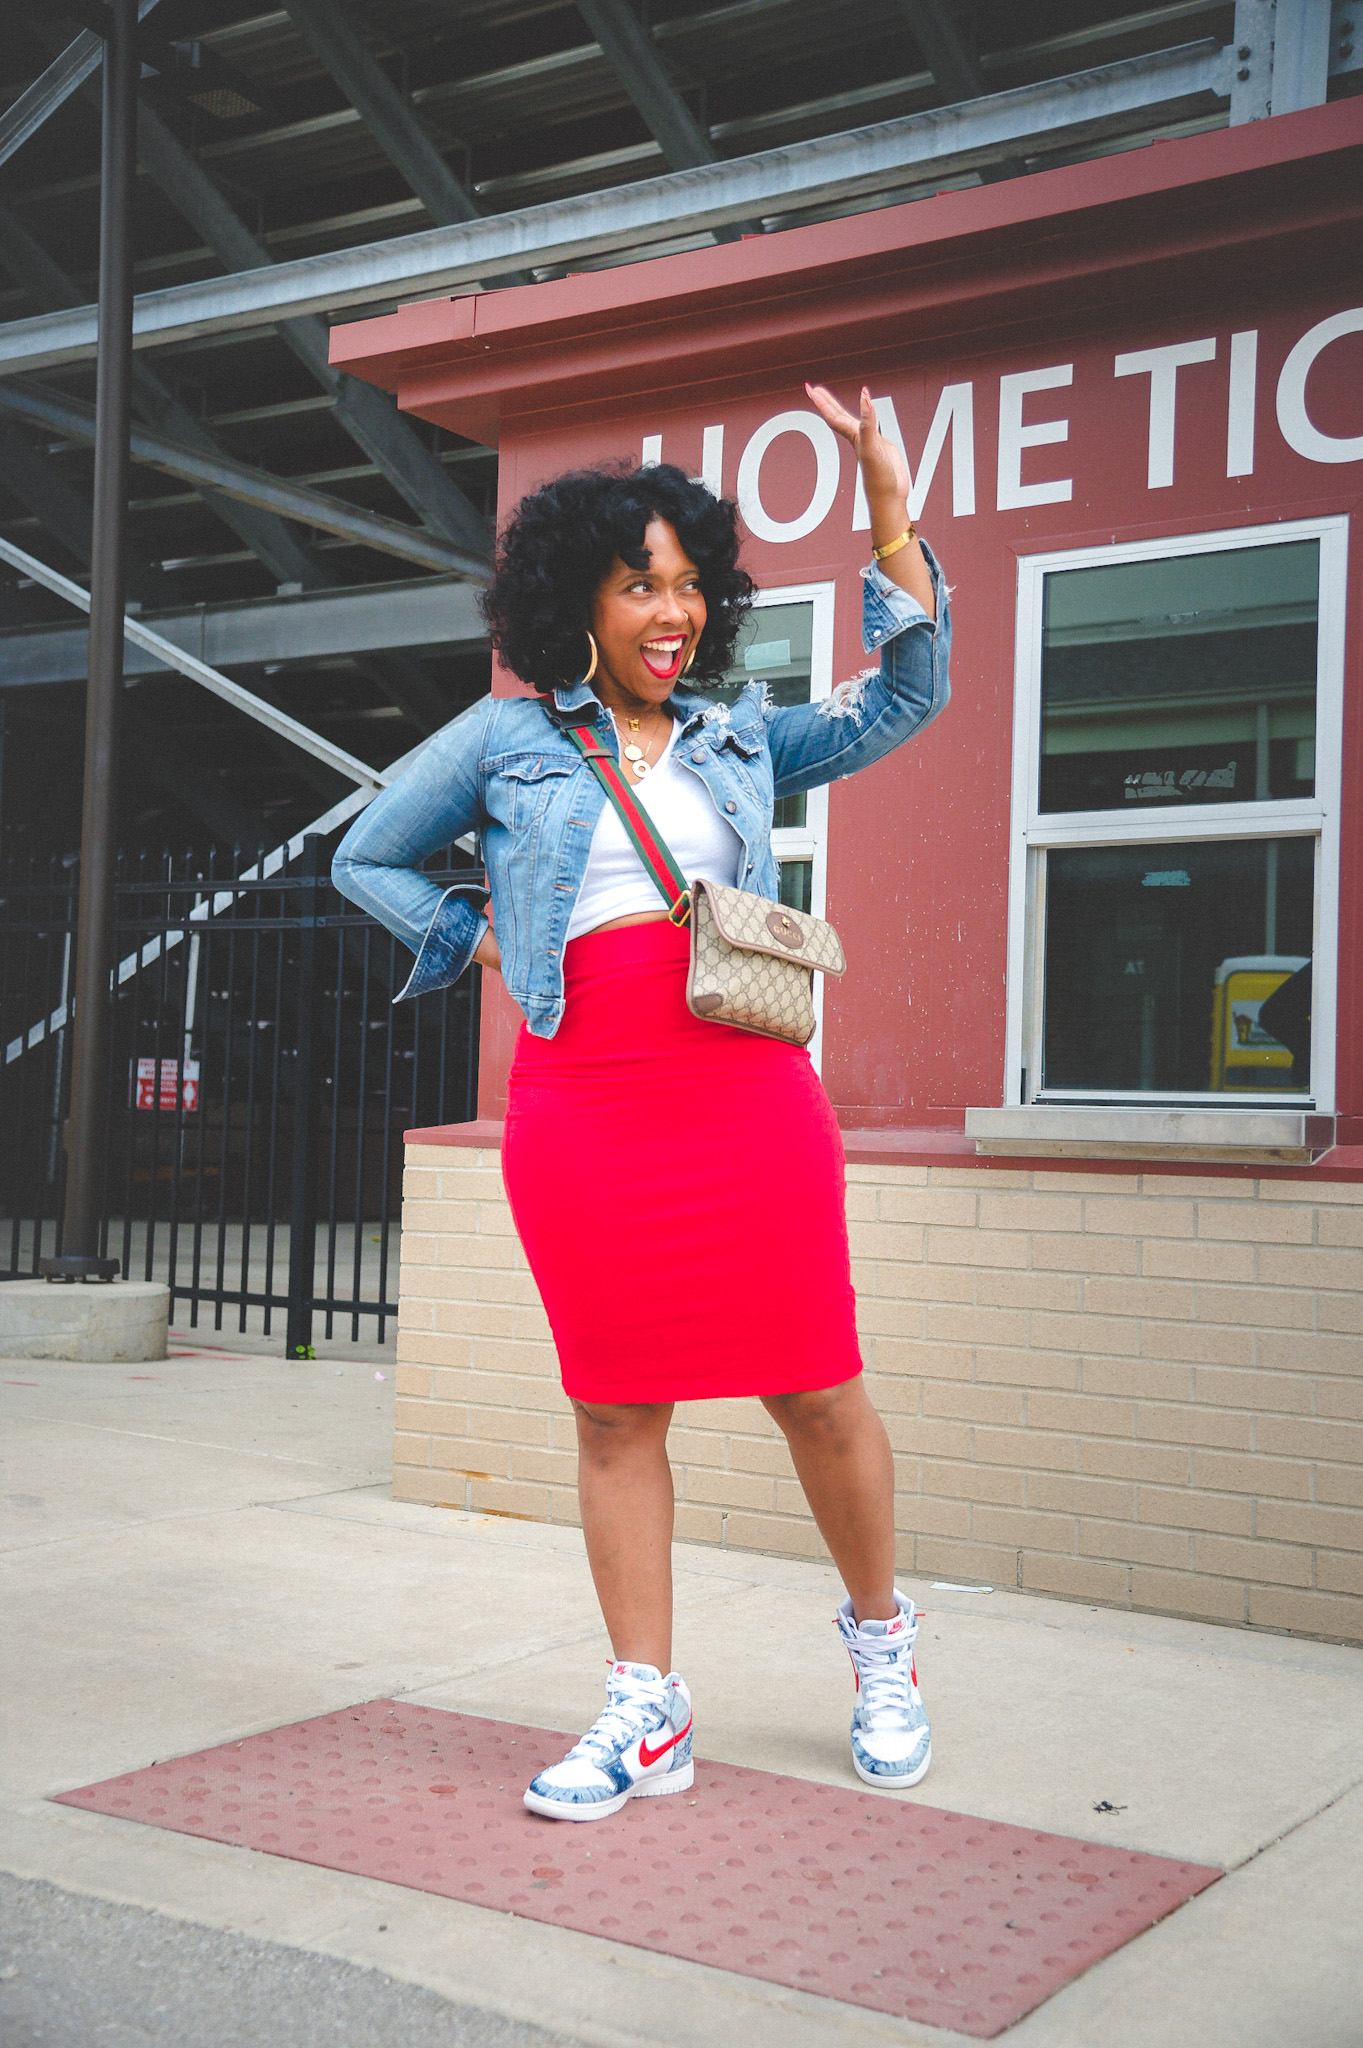 HBCU HOMECOMING OUTFIT IDEA USING
ITEMS YOU HAVE IN YOUR CLOSET,
COLLEGIATE STYLE INSPO, CASUAL
HOMECOMING OUTFITS, DELTA SIGMA
THETA OUTFIT IDEA, SPELMAN COLLEGE.
HOWARD UNIVERSITY, SPORTY GIRL
AESTHETIC, WHAT TO WEAR TO HBCU HOMECOMING, HOW TO WEAR LEGGINGS TO HOMECOMING, GAME DAY OUTFIT, HBCU FASHION
